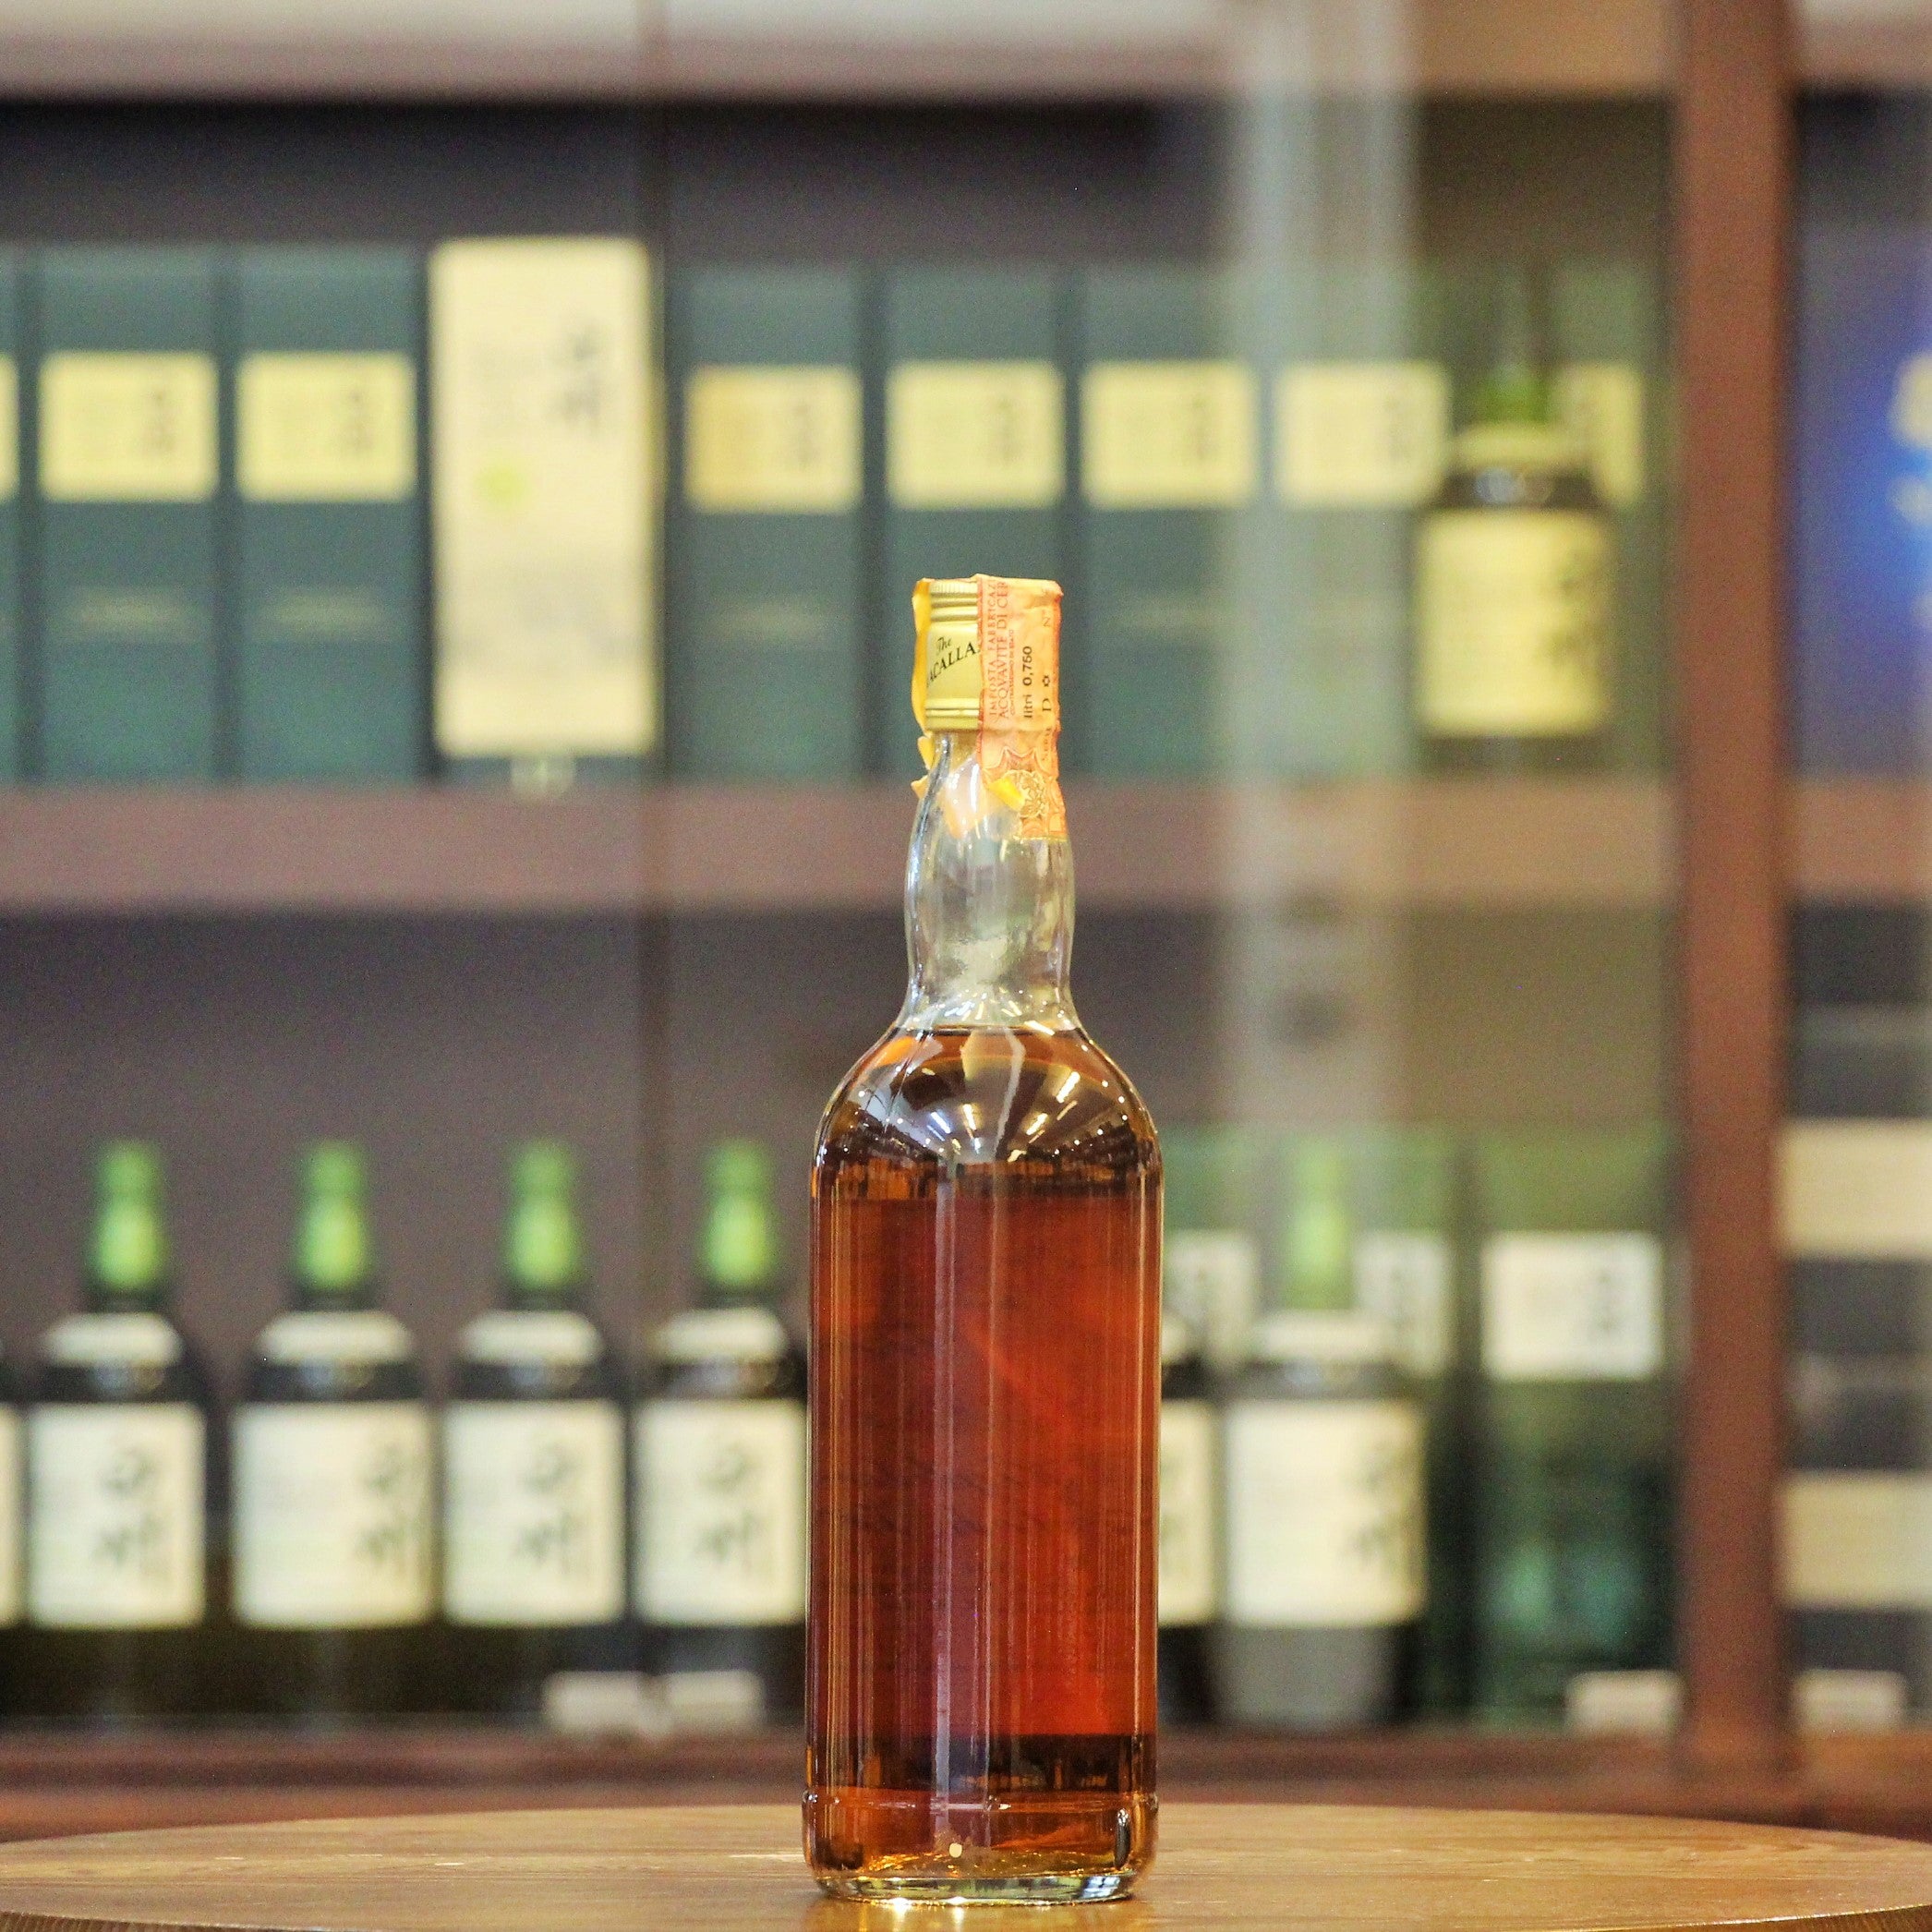 G&M is known to have been a regular buyer of stock from Macallan during the 1930s and 1940s and which helped the Distillery survive during that period. This in turn allowed G&M to release several of these incredibly rare (and now difficult to find) bottlings, primarily meant for the Italian market.